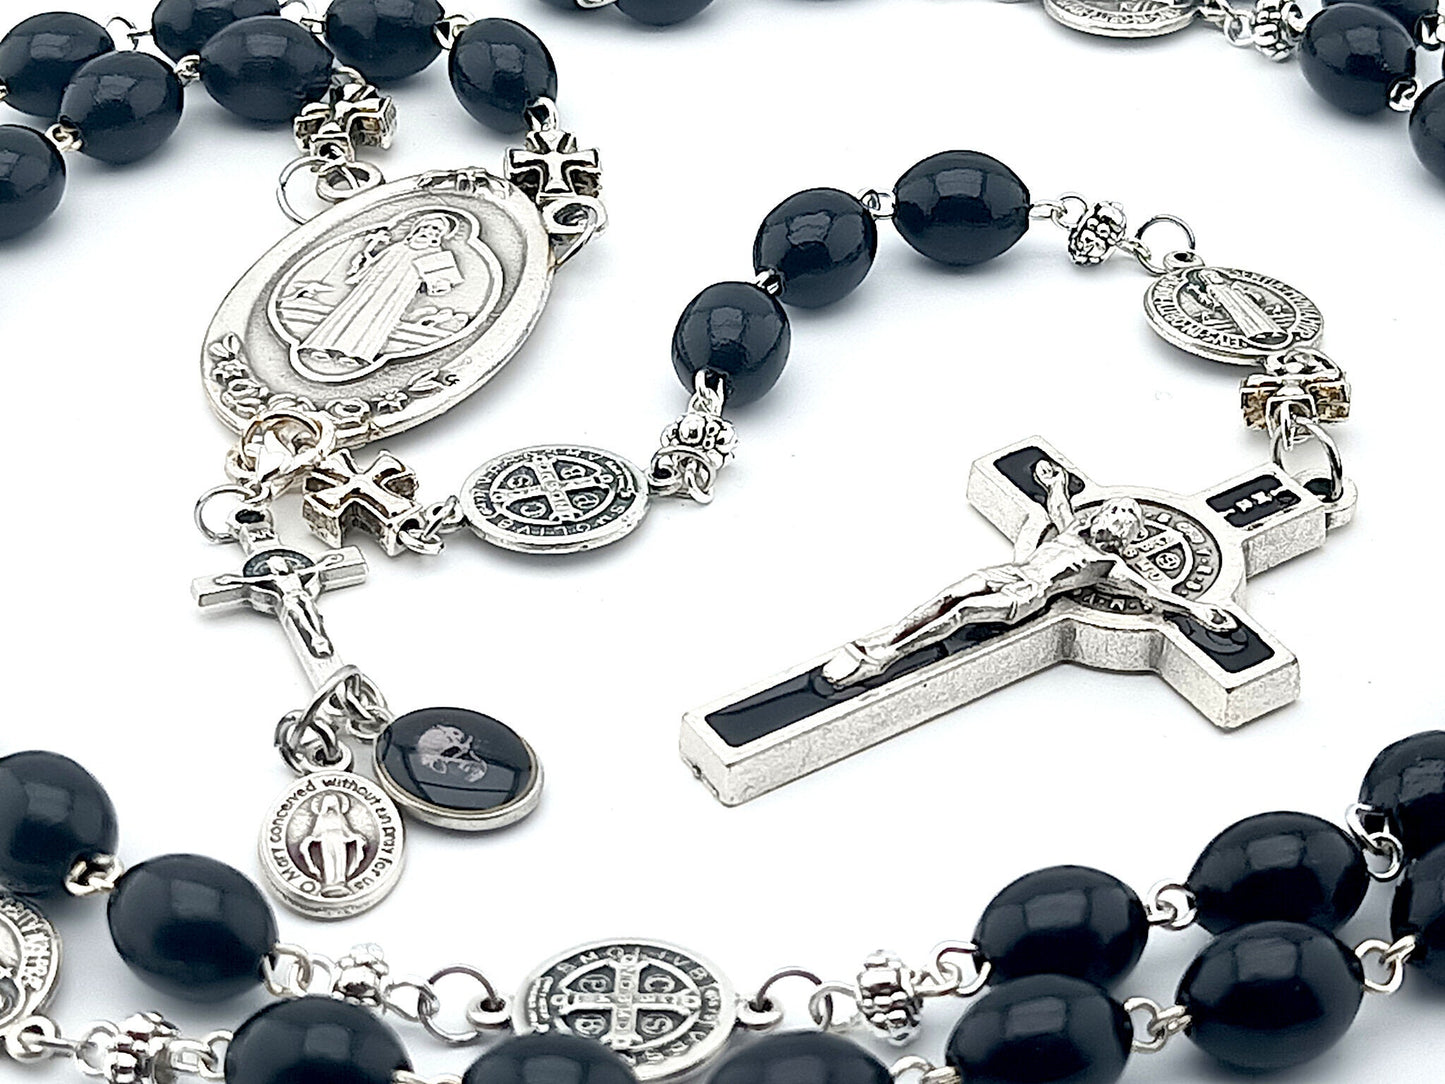 Saint Benedict unique rosary beads with black wooden beads, black and silver enamel Saint Benedict crucifix and centre medal.